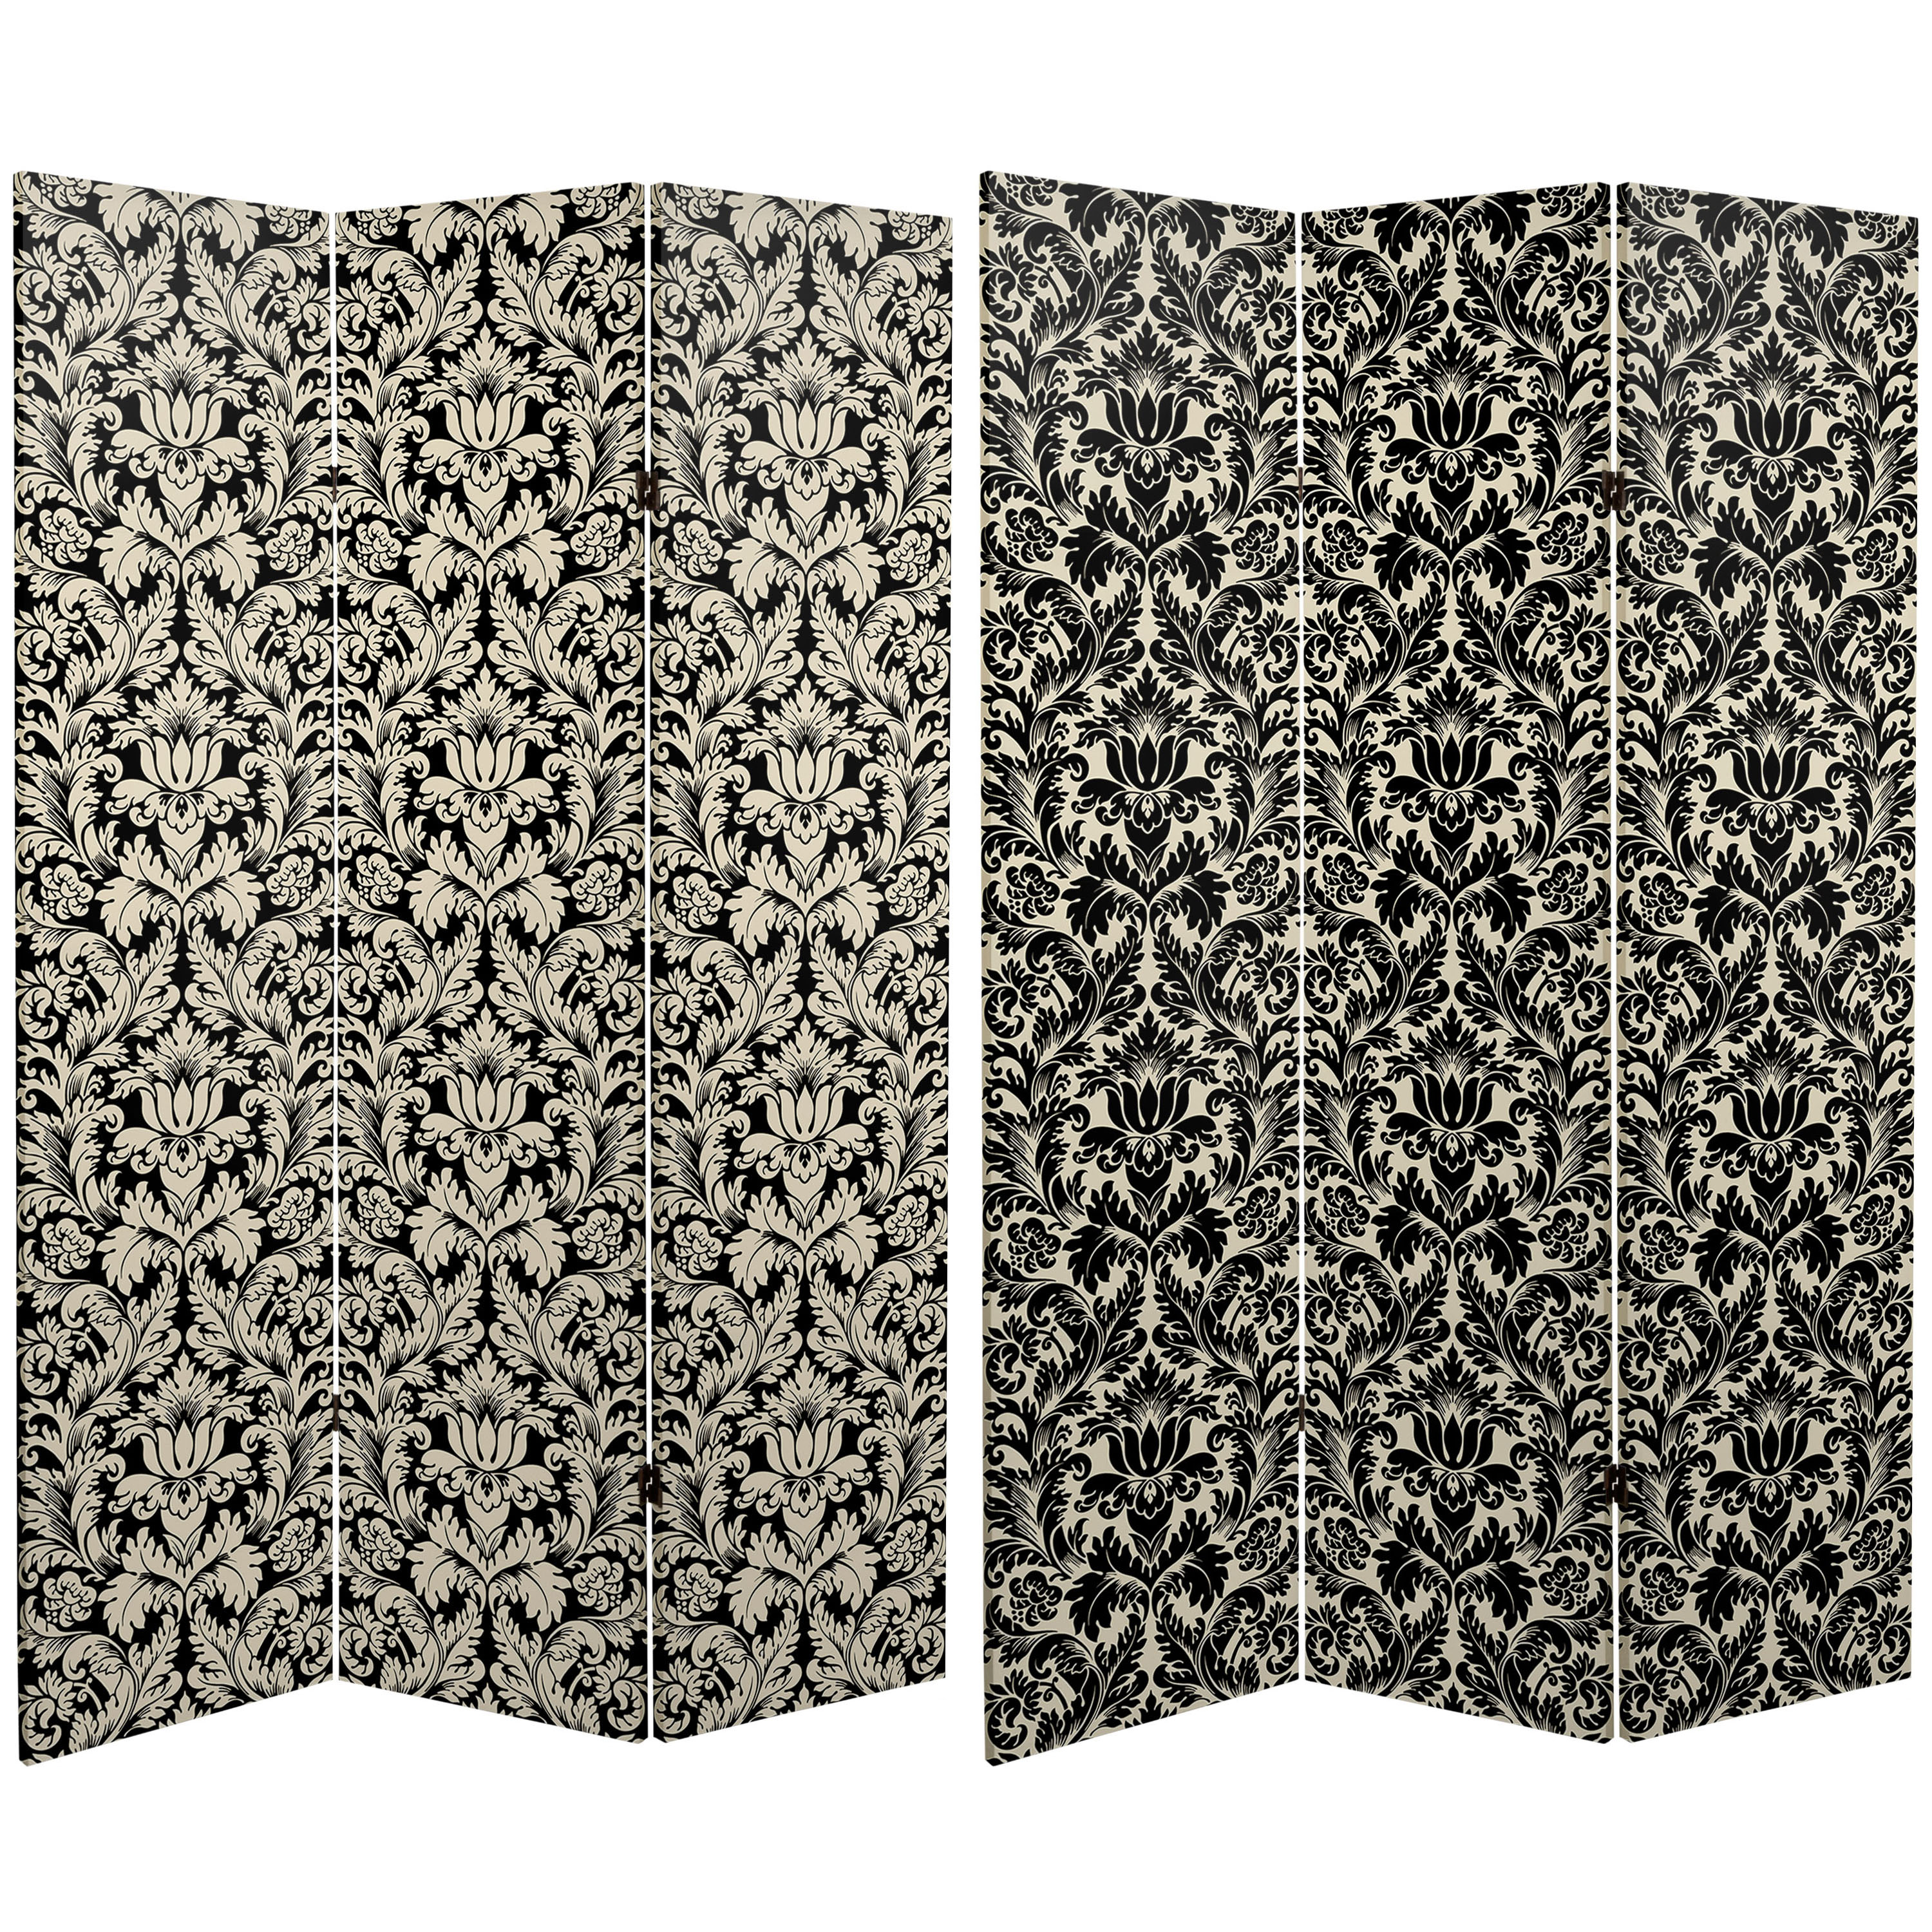 Red Lantern 6 ft. Tall Double Sided Ebony Damask Canvas Room Divider